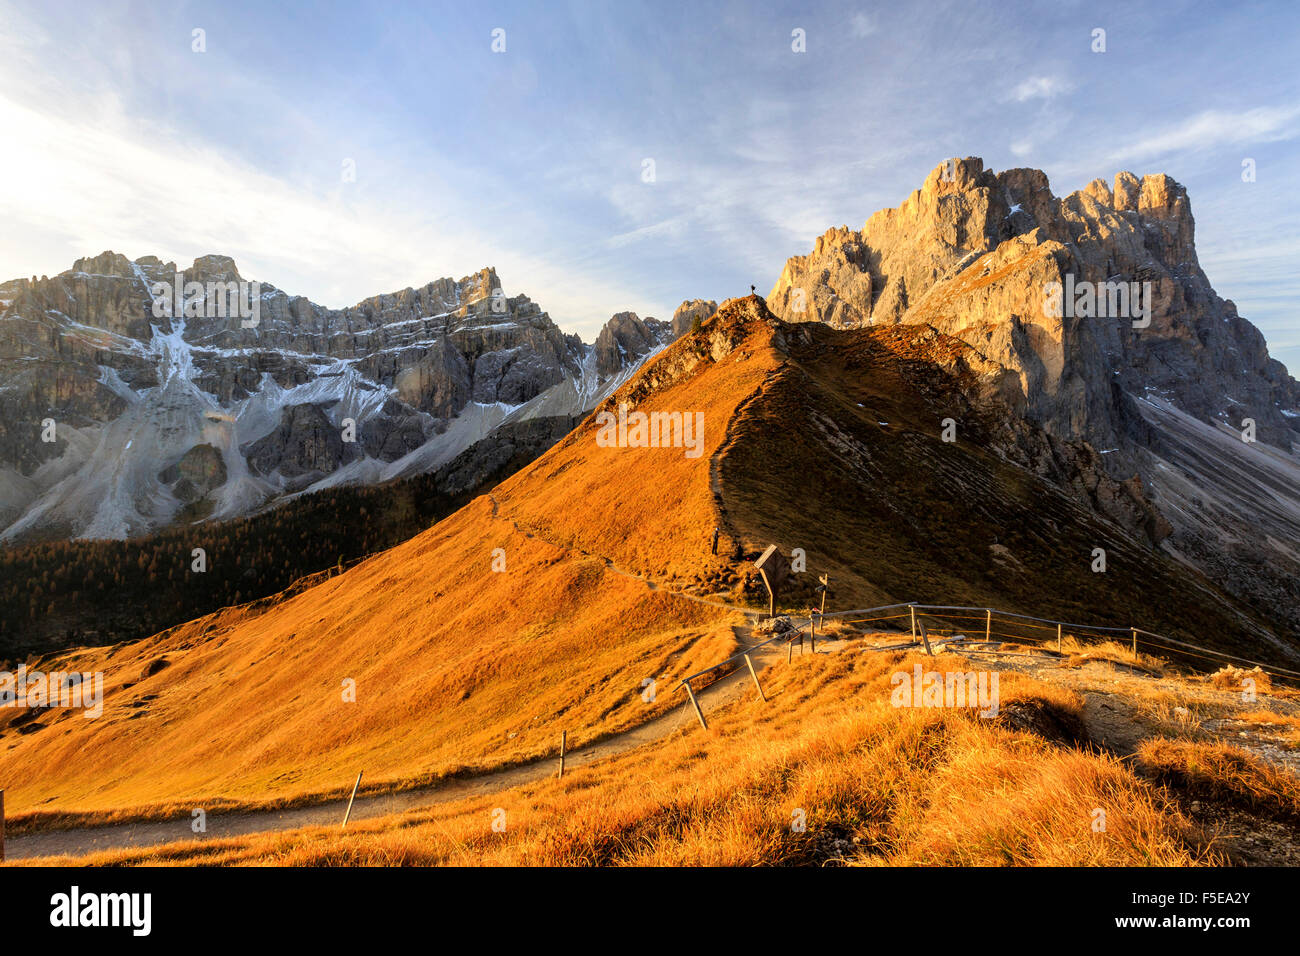 Hiking trails around the group of Forcella De Furcia, Funes Valley, South Tyrol, Dolomites, Italy, Europe Stock Photo